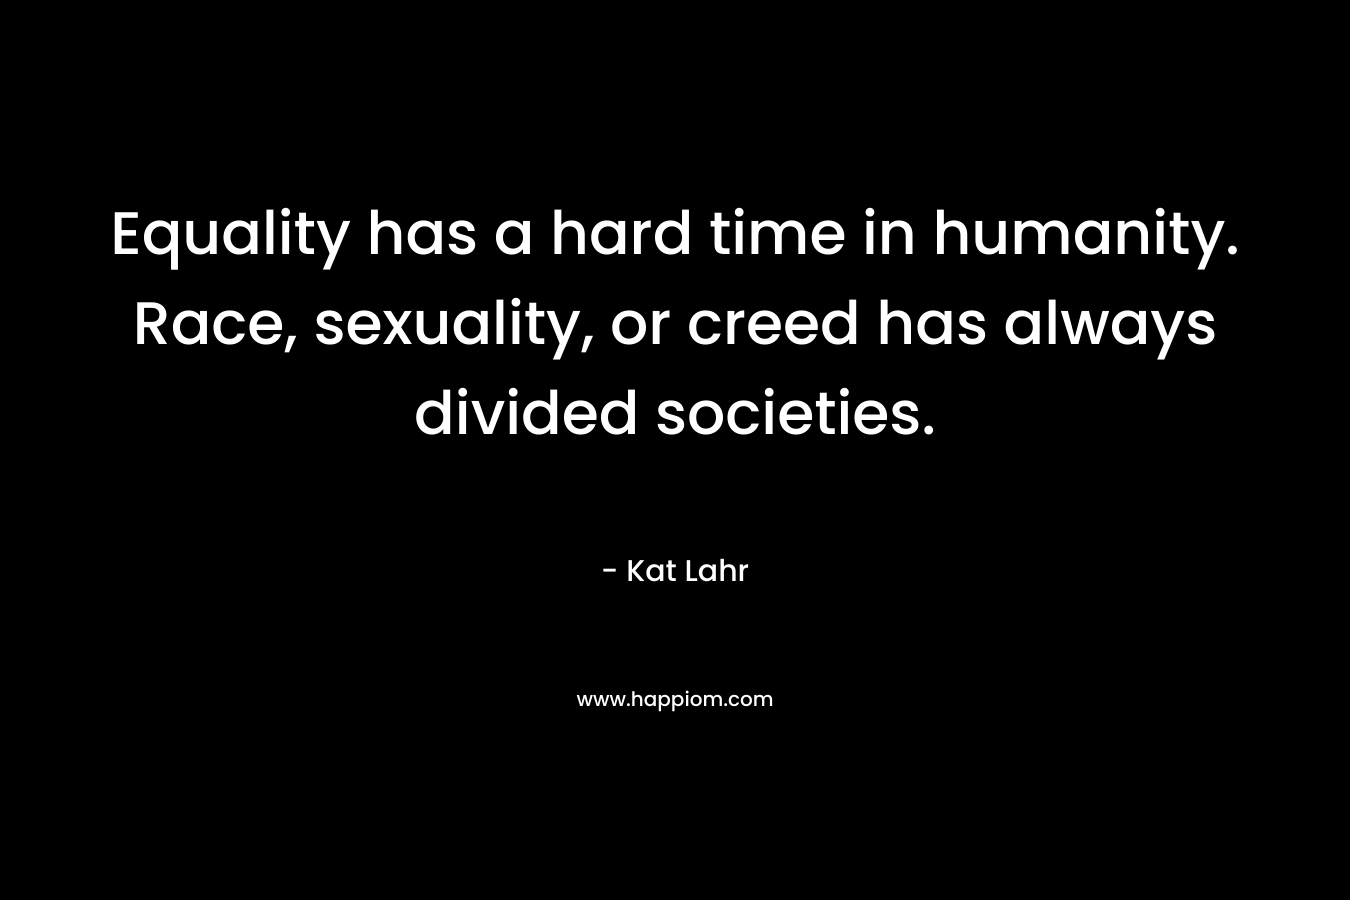 Equality has a hard time in humanity. Race, sexuality, or creed has always divided societies. – Kat Lahr